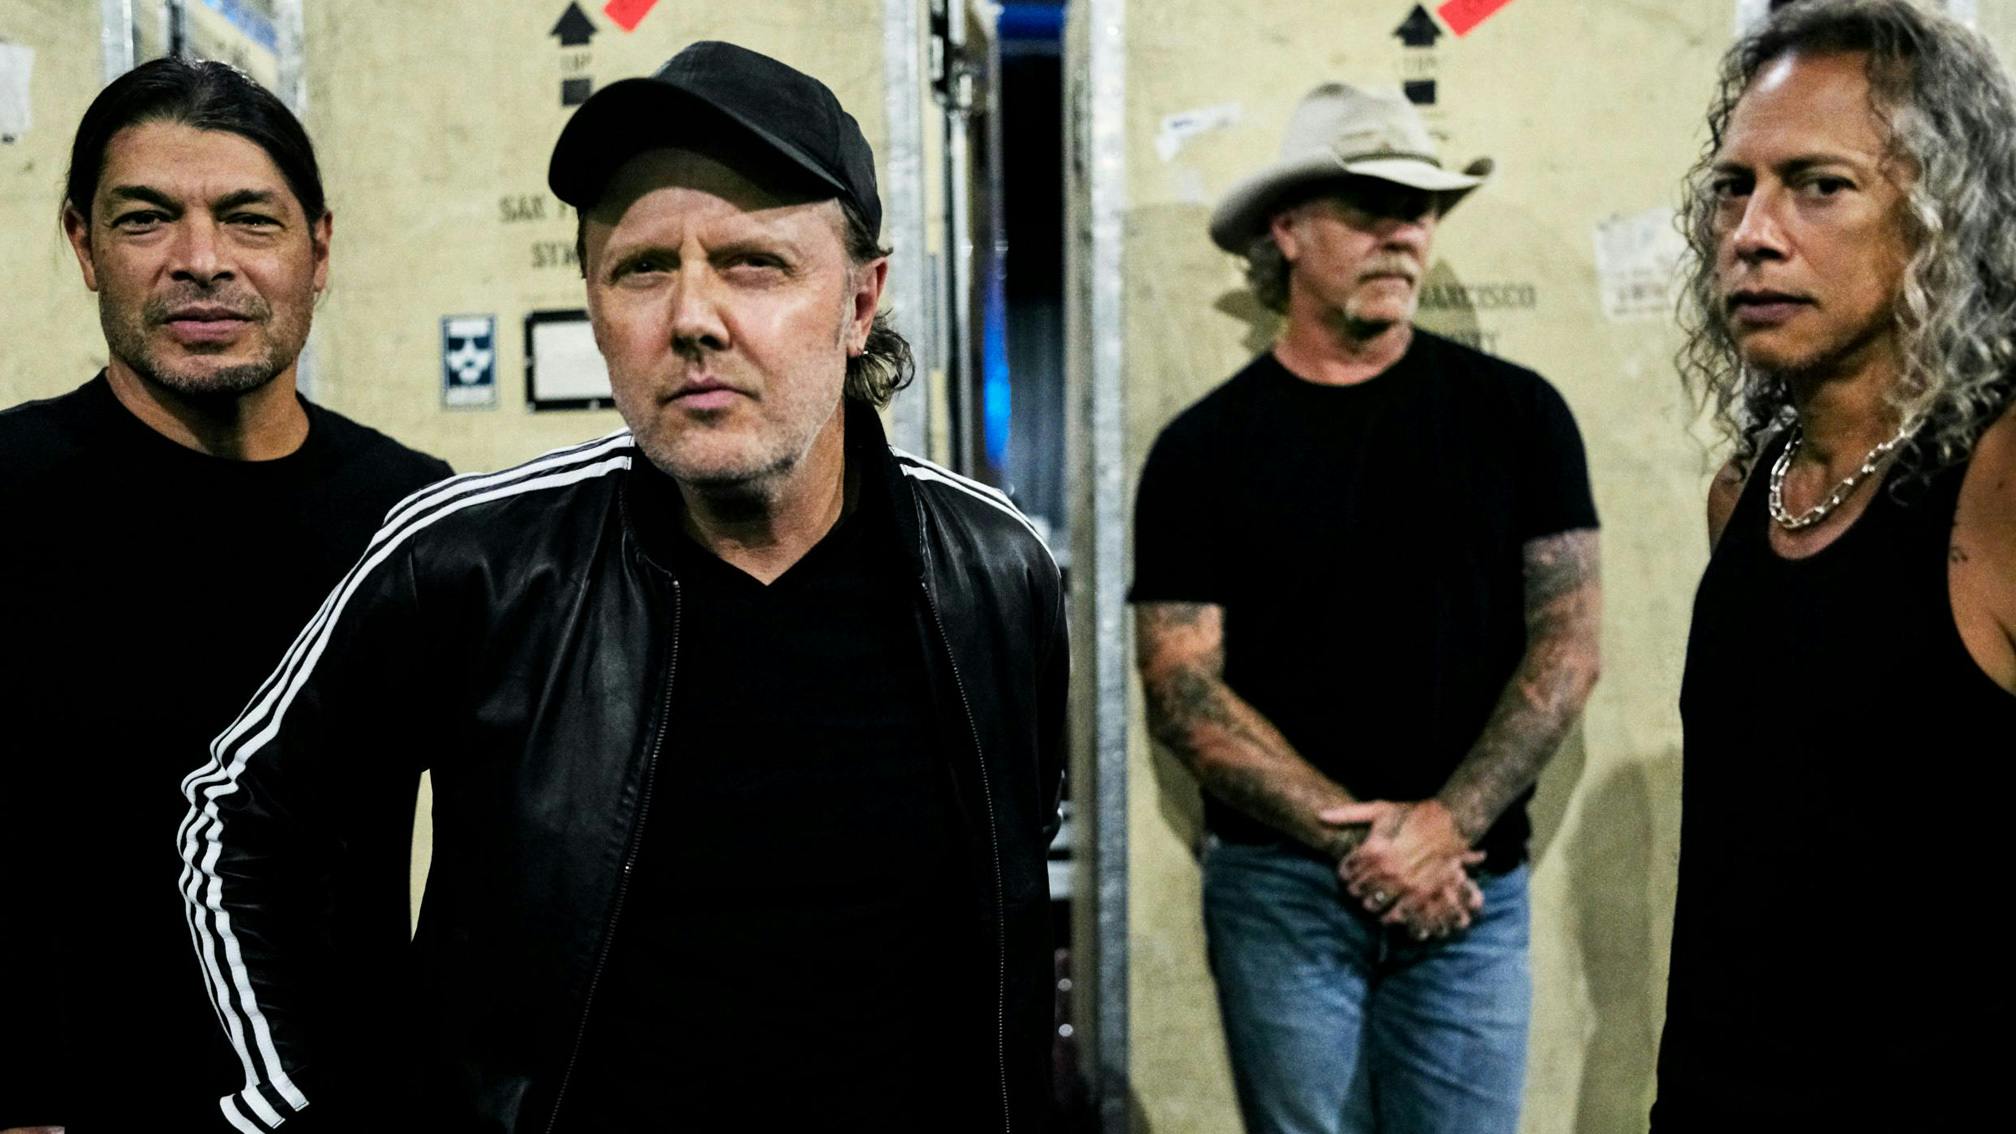 Lars Ulrich says Metallica are making "glacial" progress on their new album